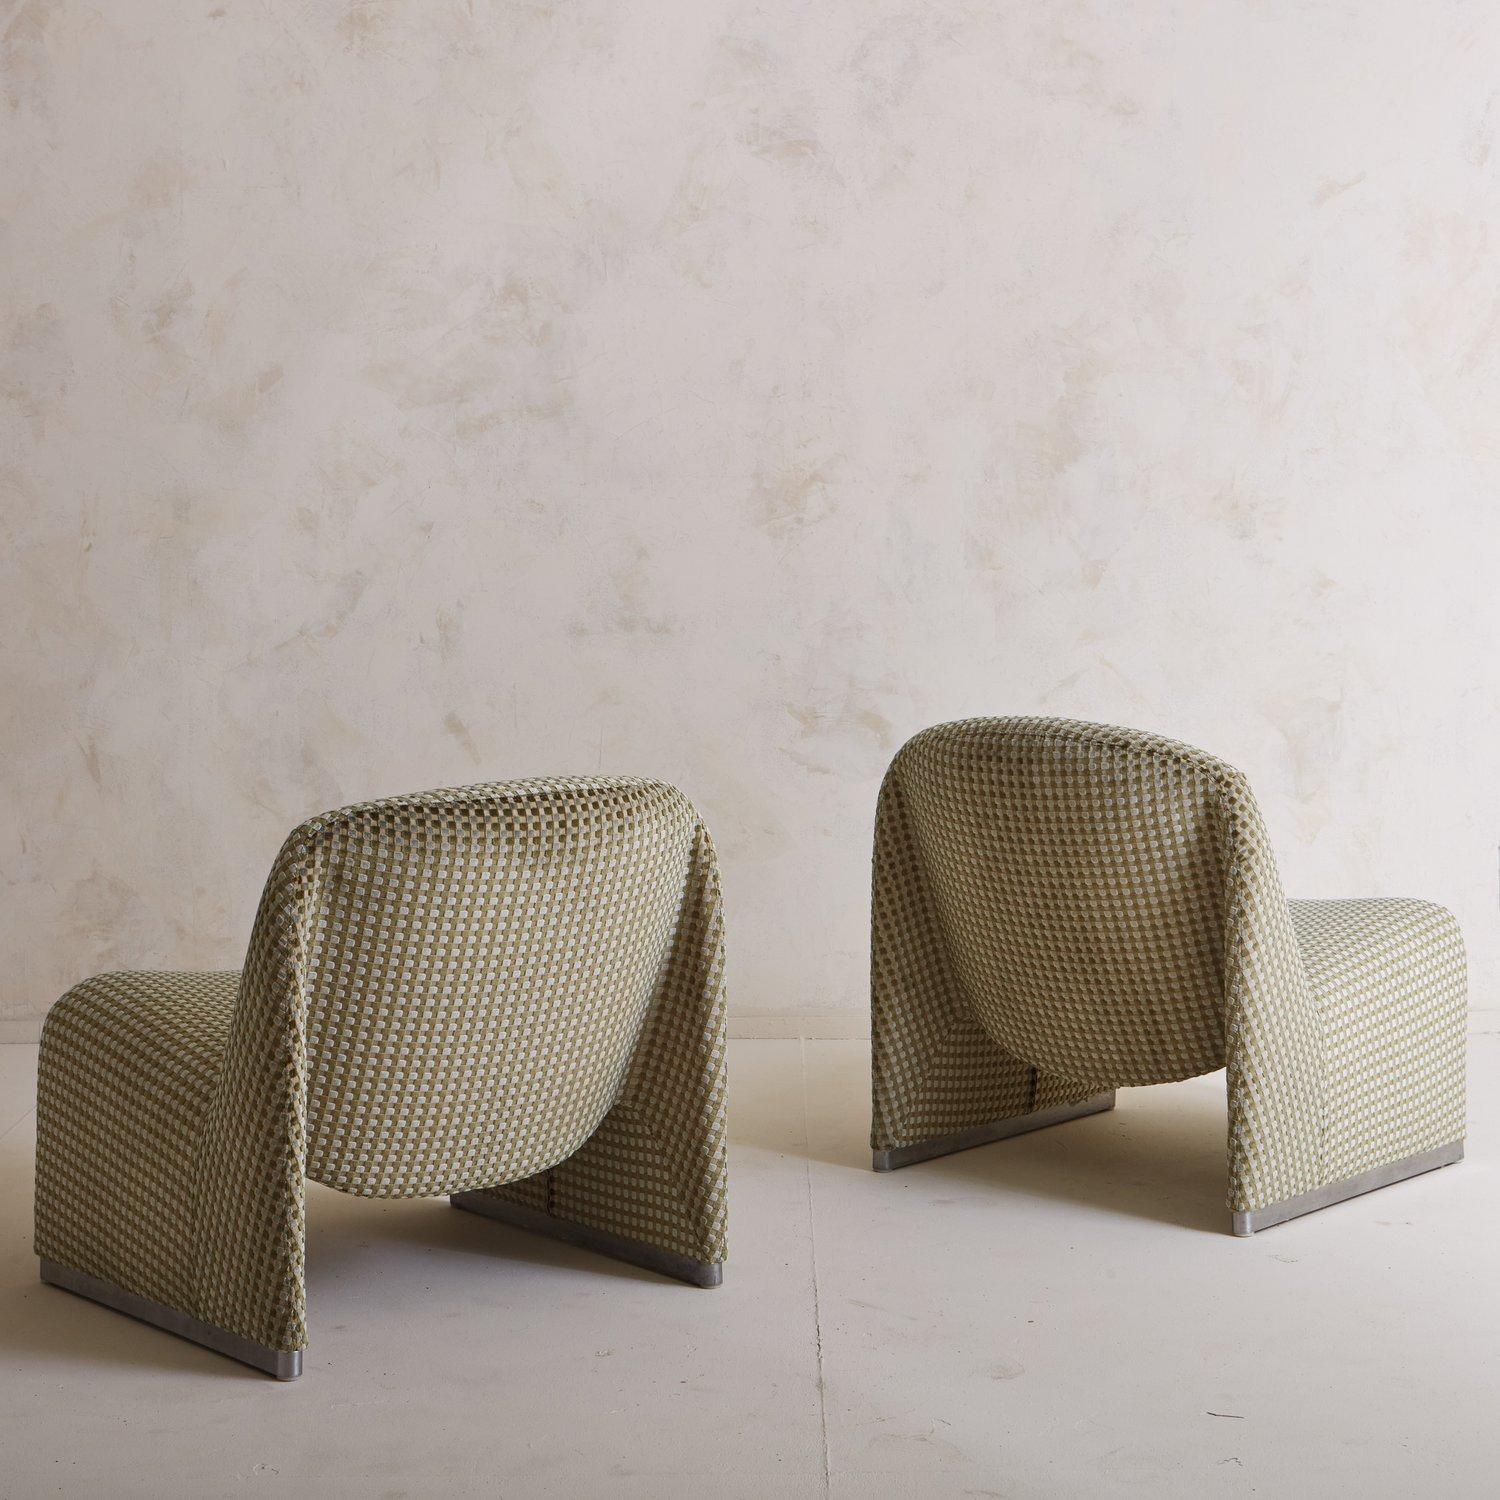 Italian Pair of Alky Chairs in Checkered Green Velvet by Giancarlo Piretti for Castelli